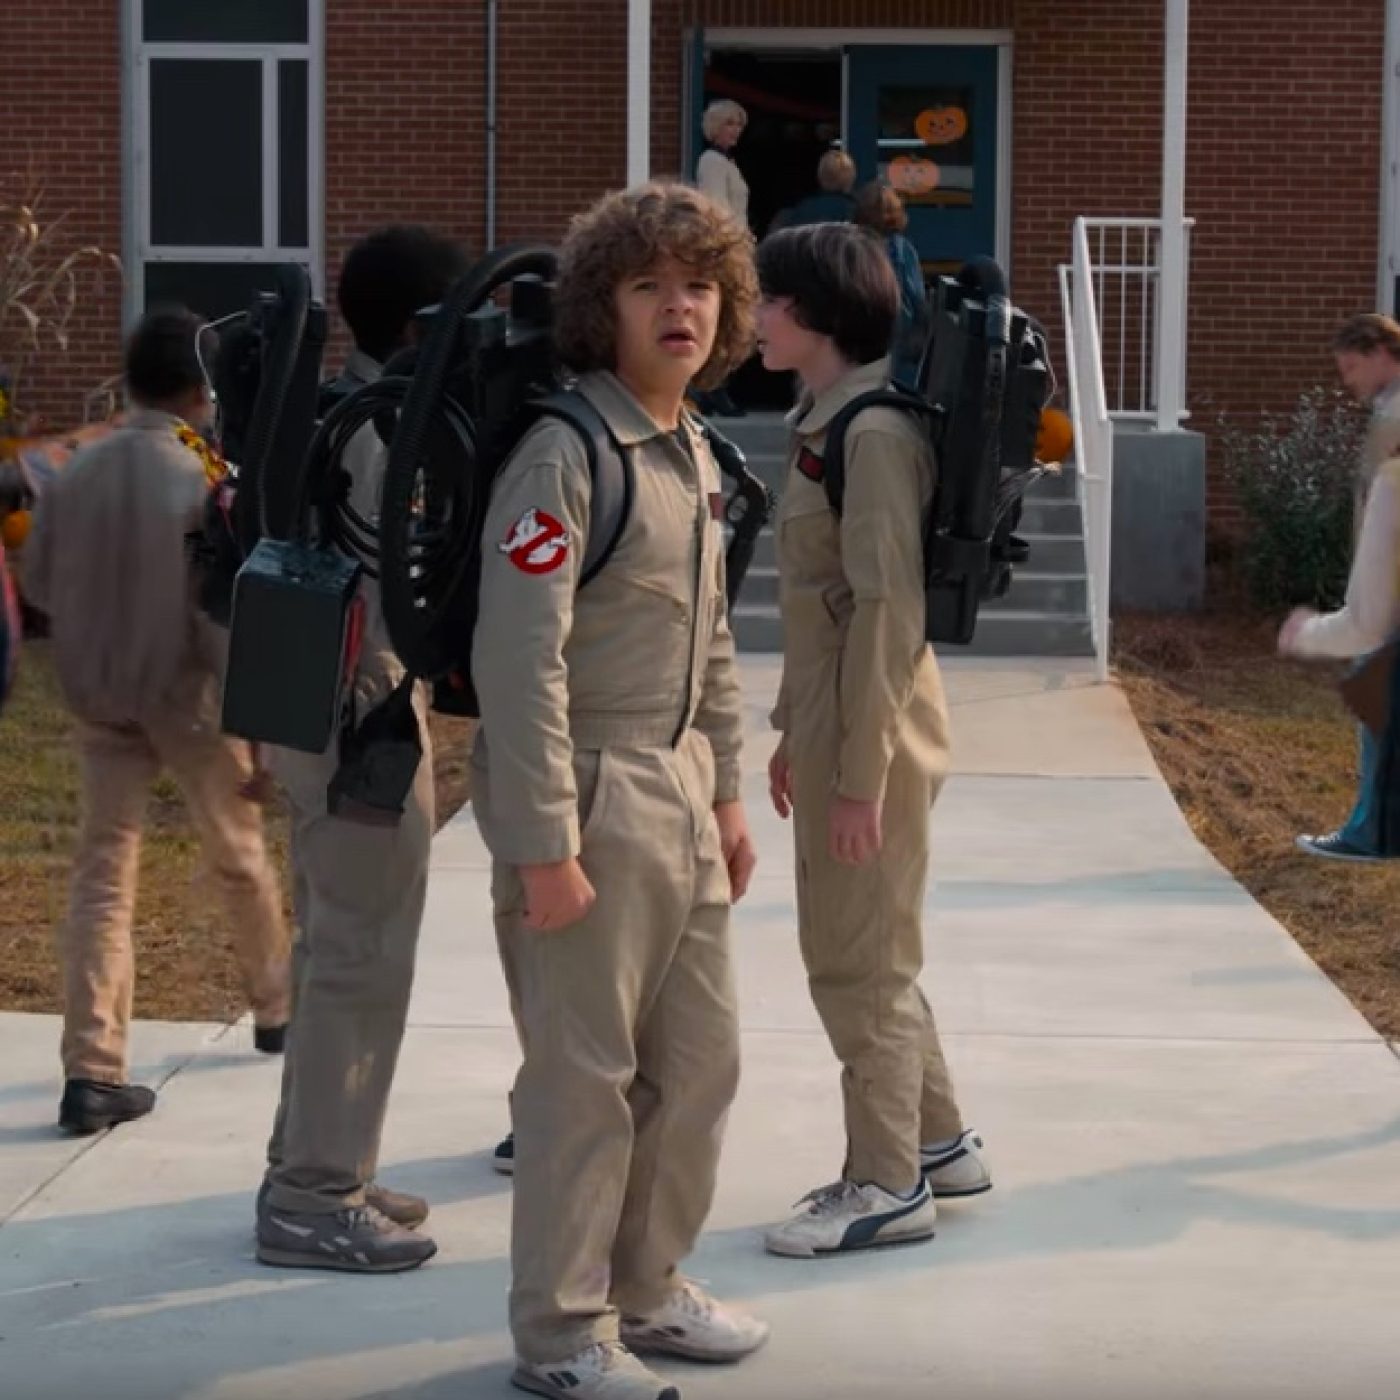 Science fiction-horror web series 'Stranger Things' soon to have an  aftershow